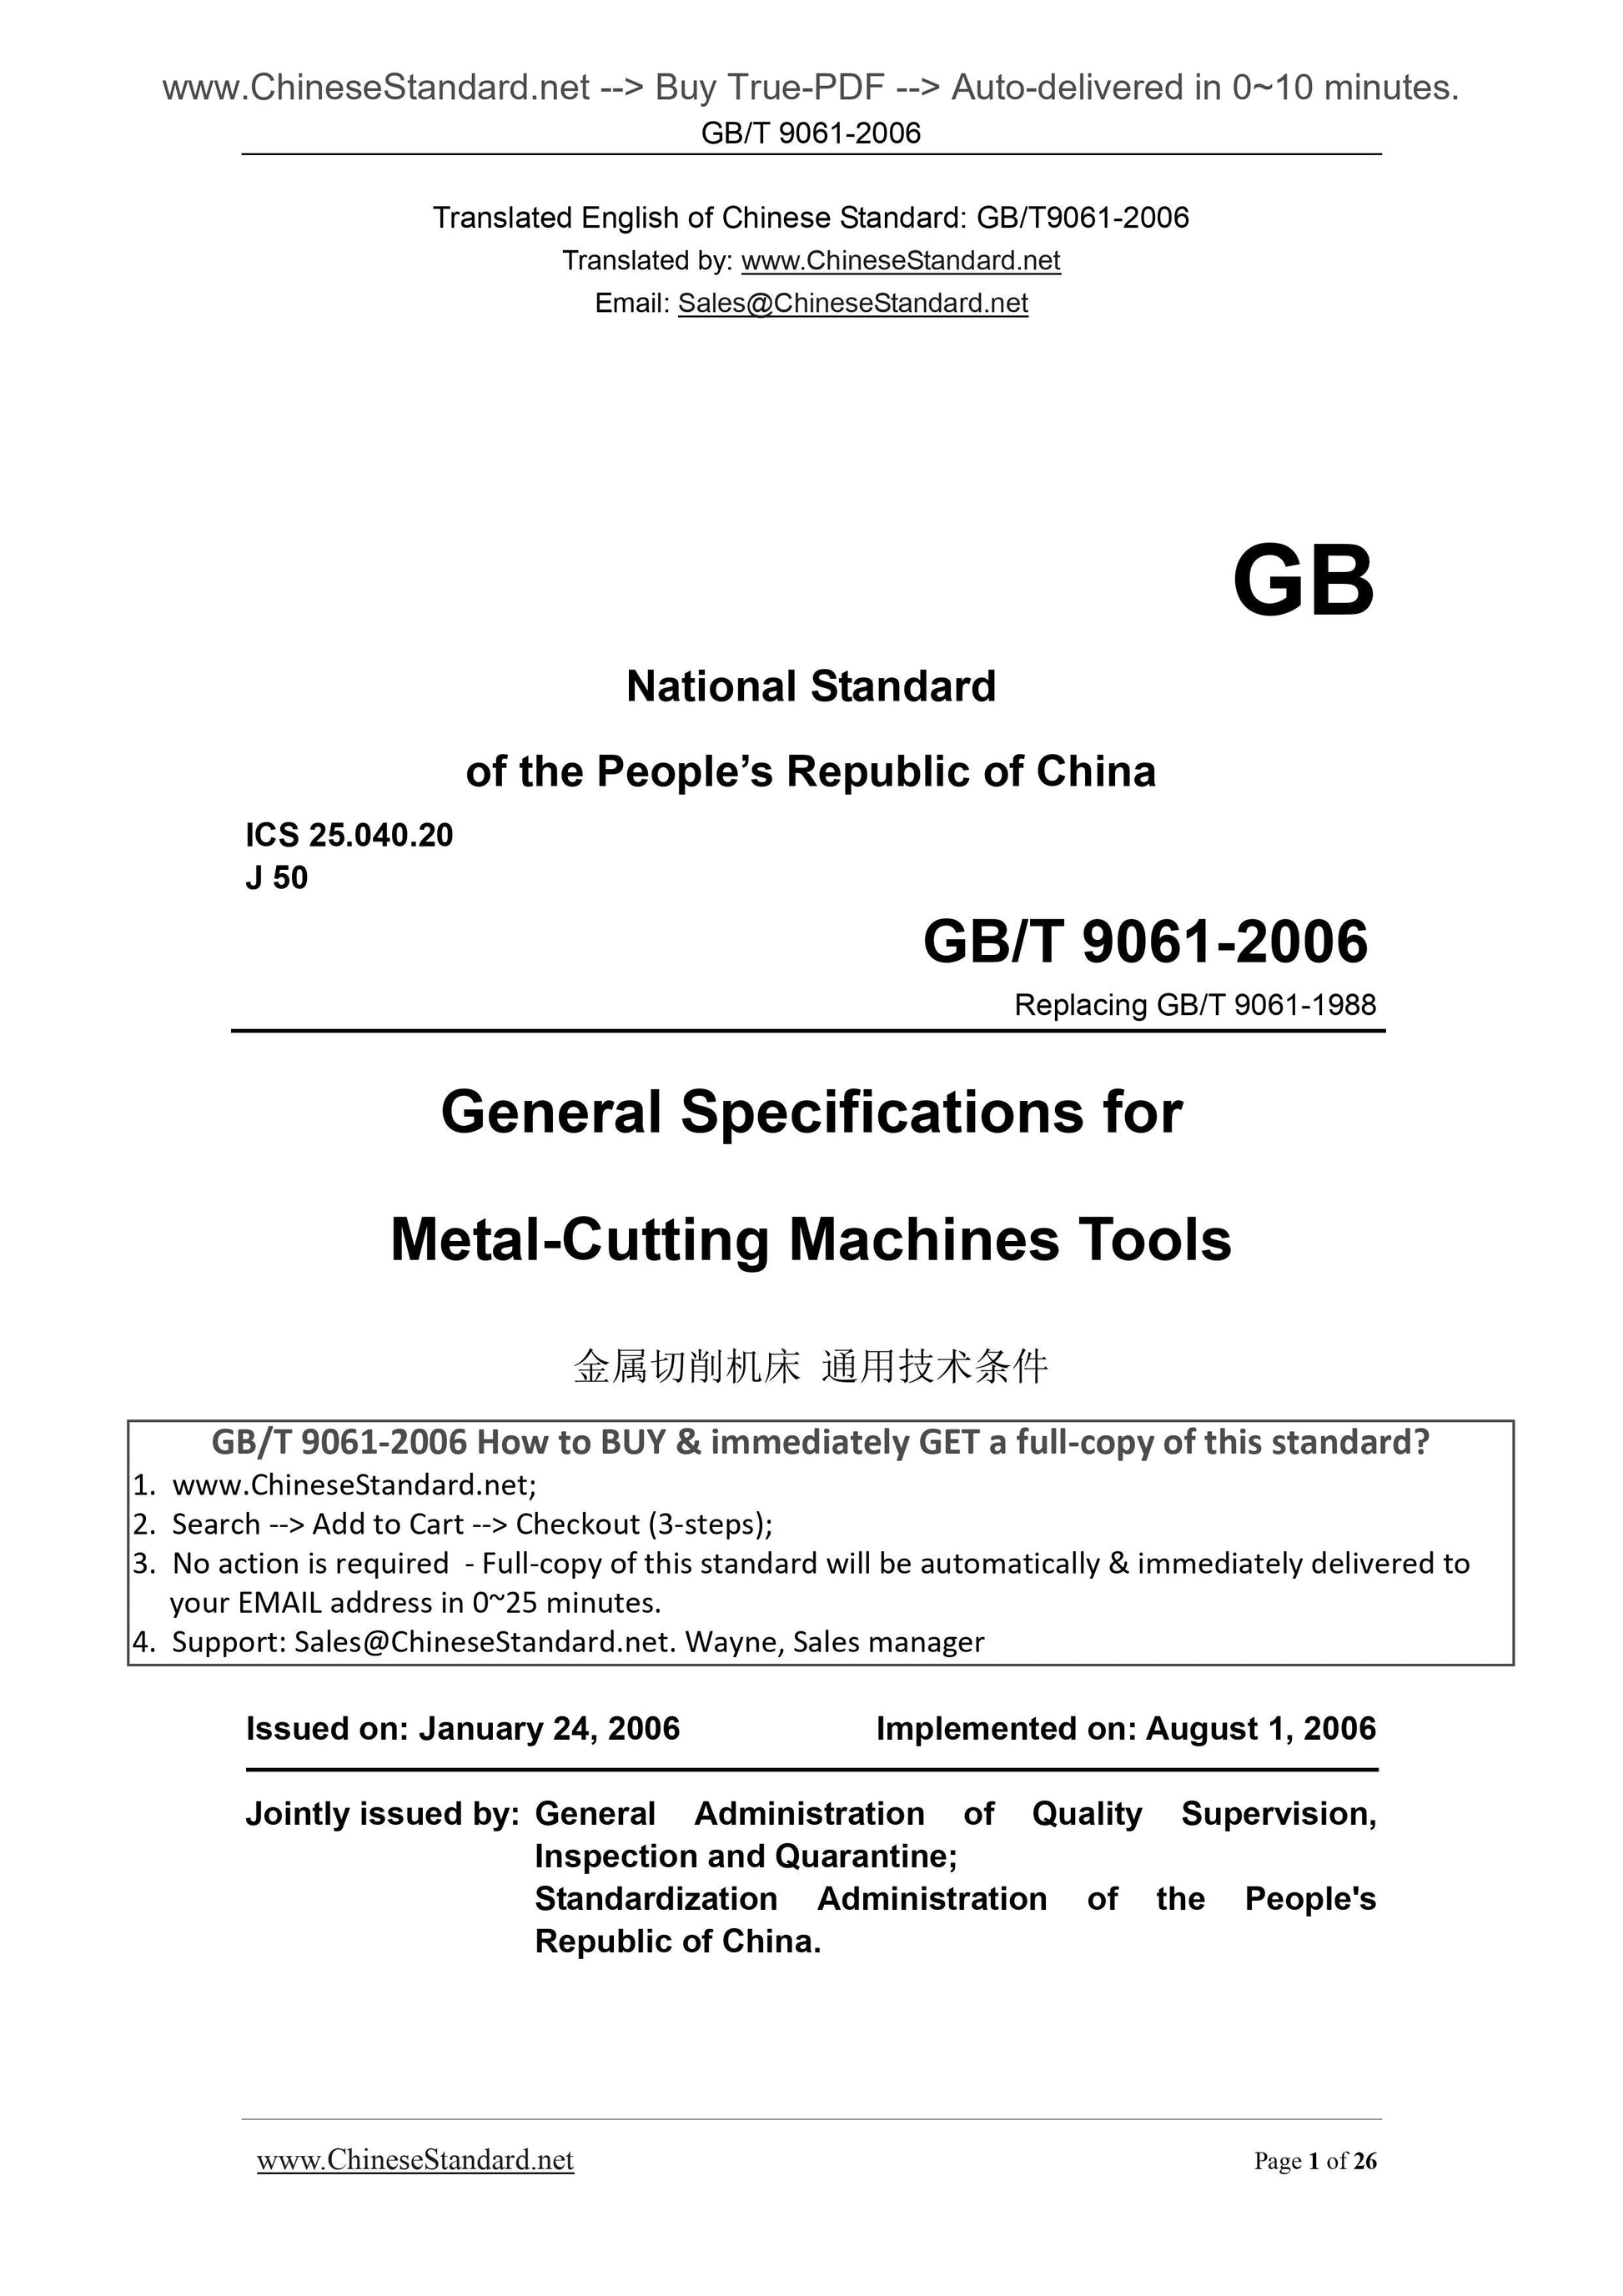 GB/T 9061-2006 Page 1